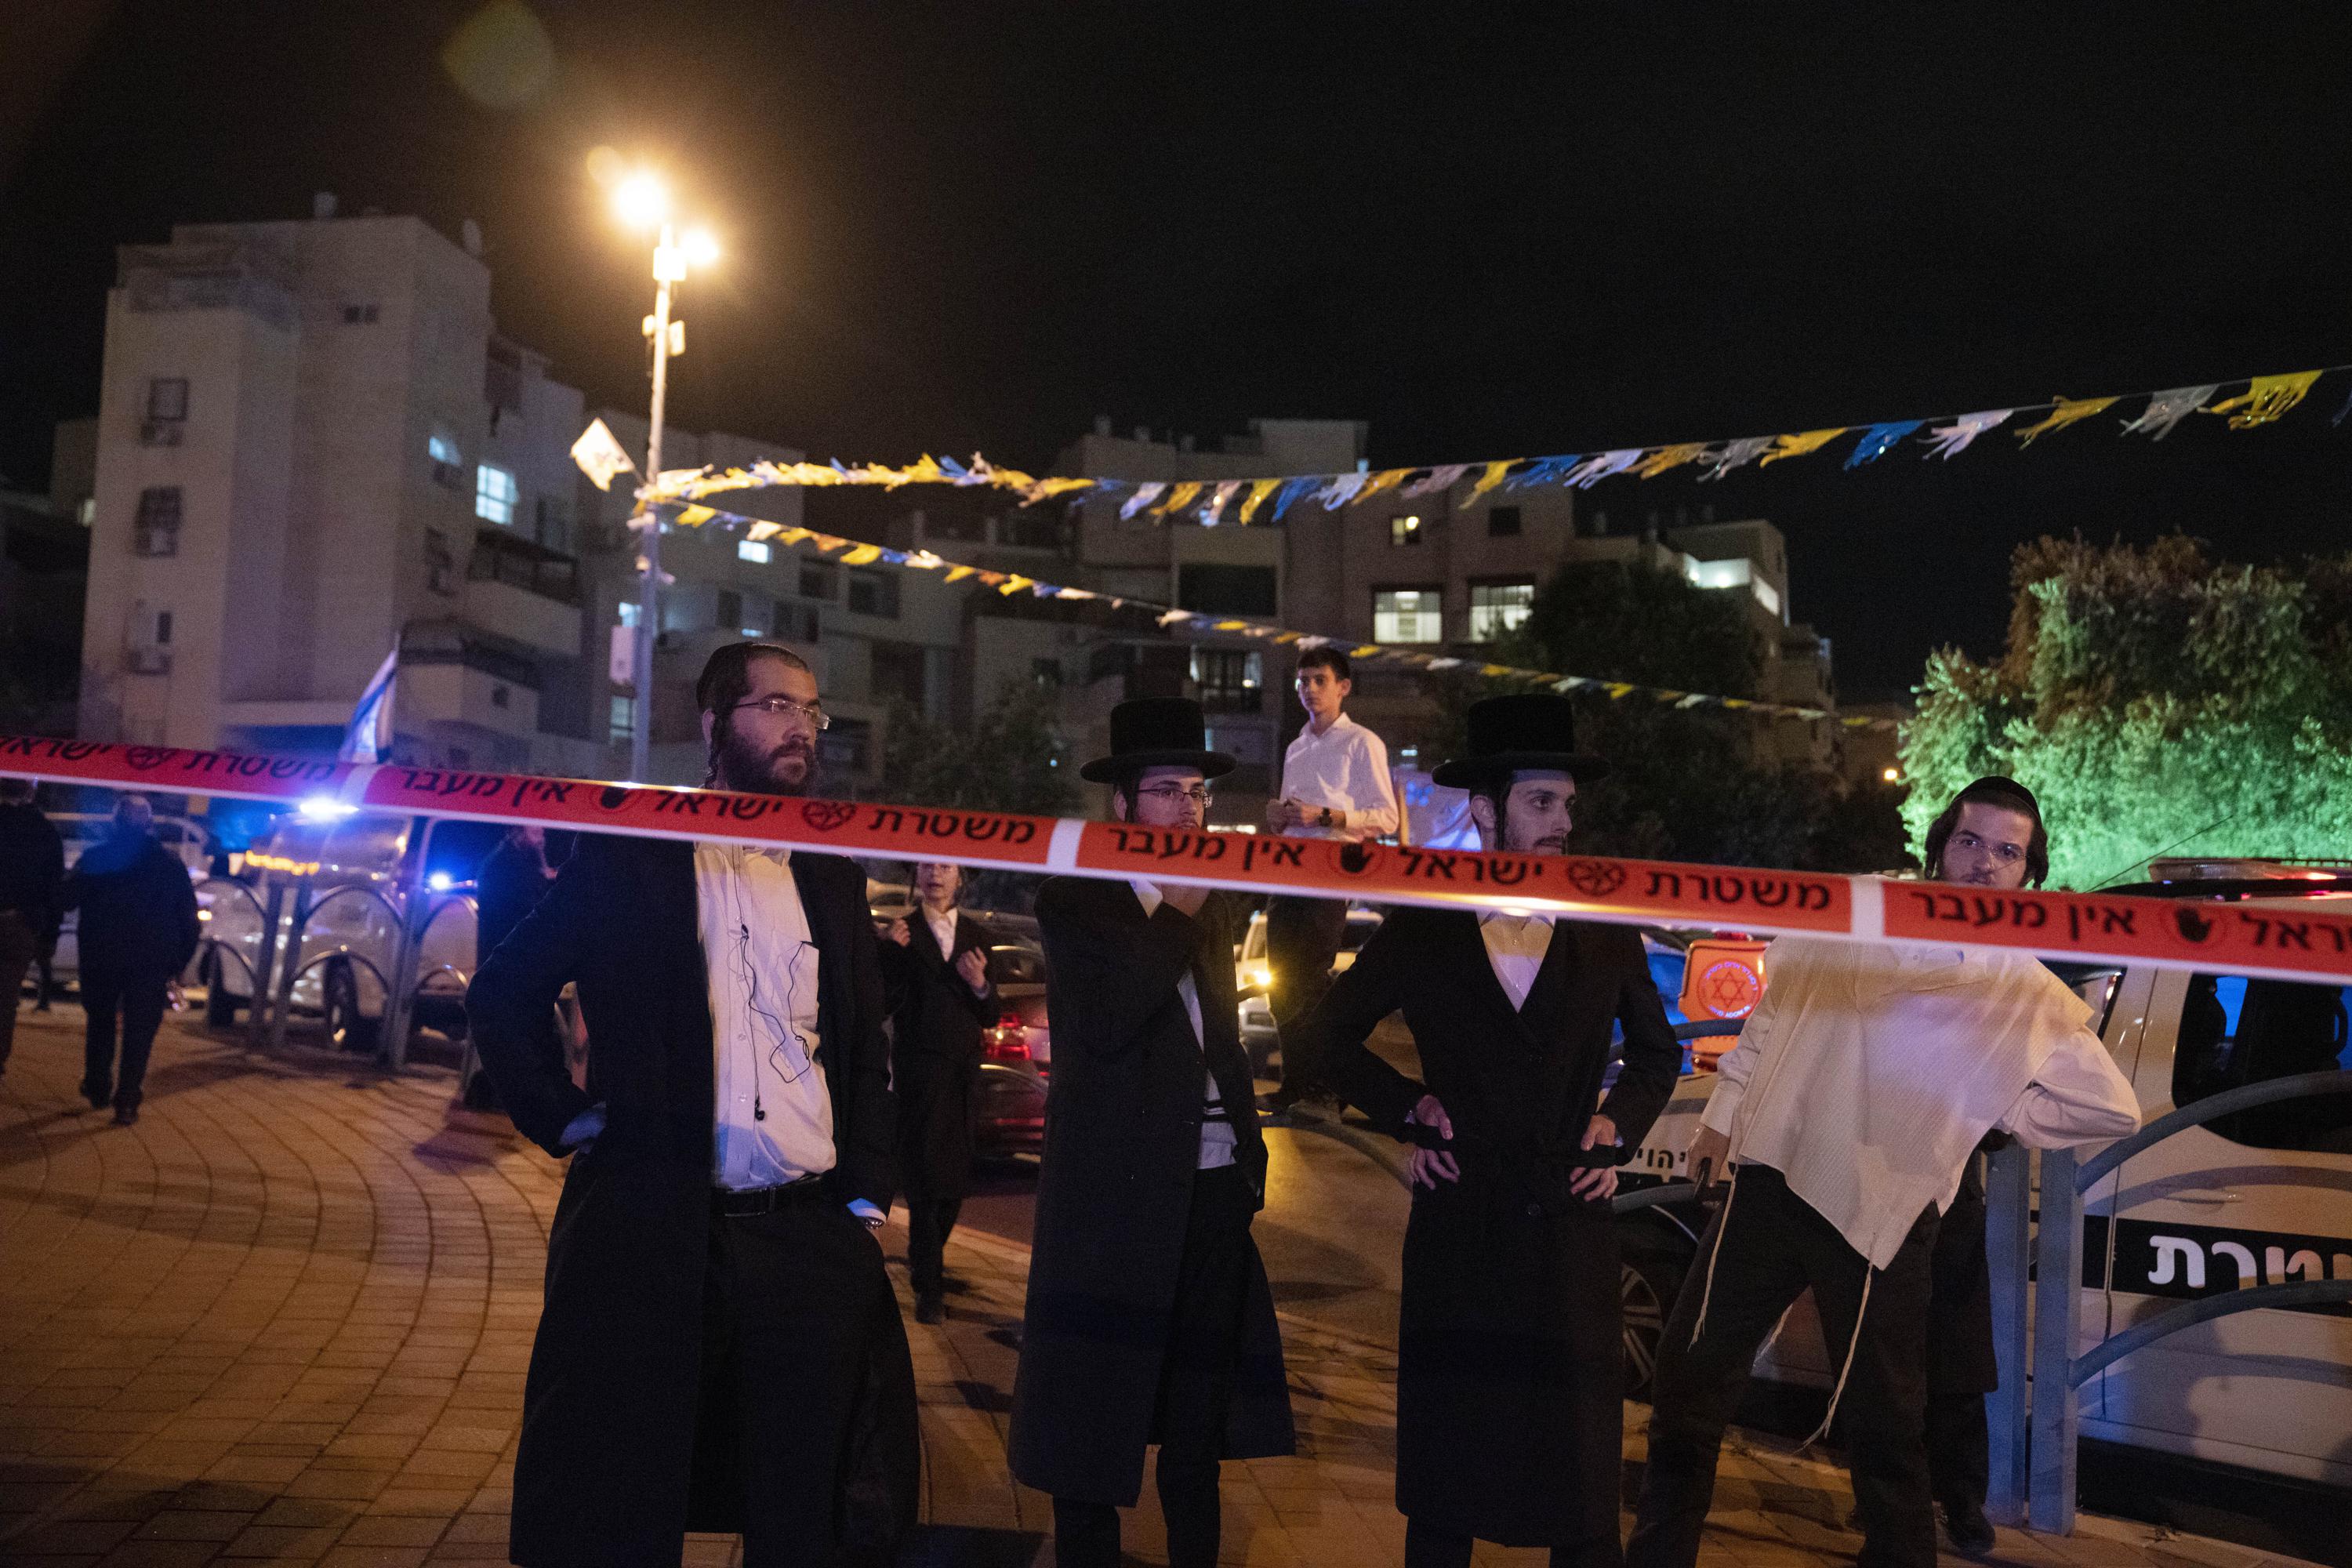 Israel captures Palestinians who killed 3 in stabbing attack – The Associated Press